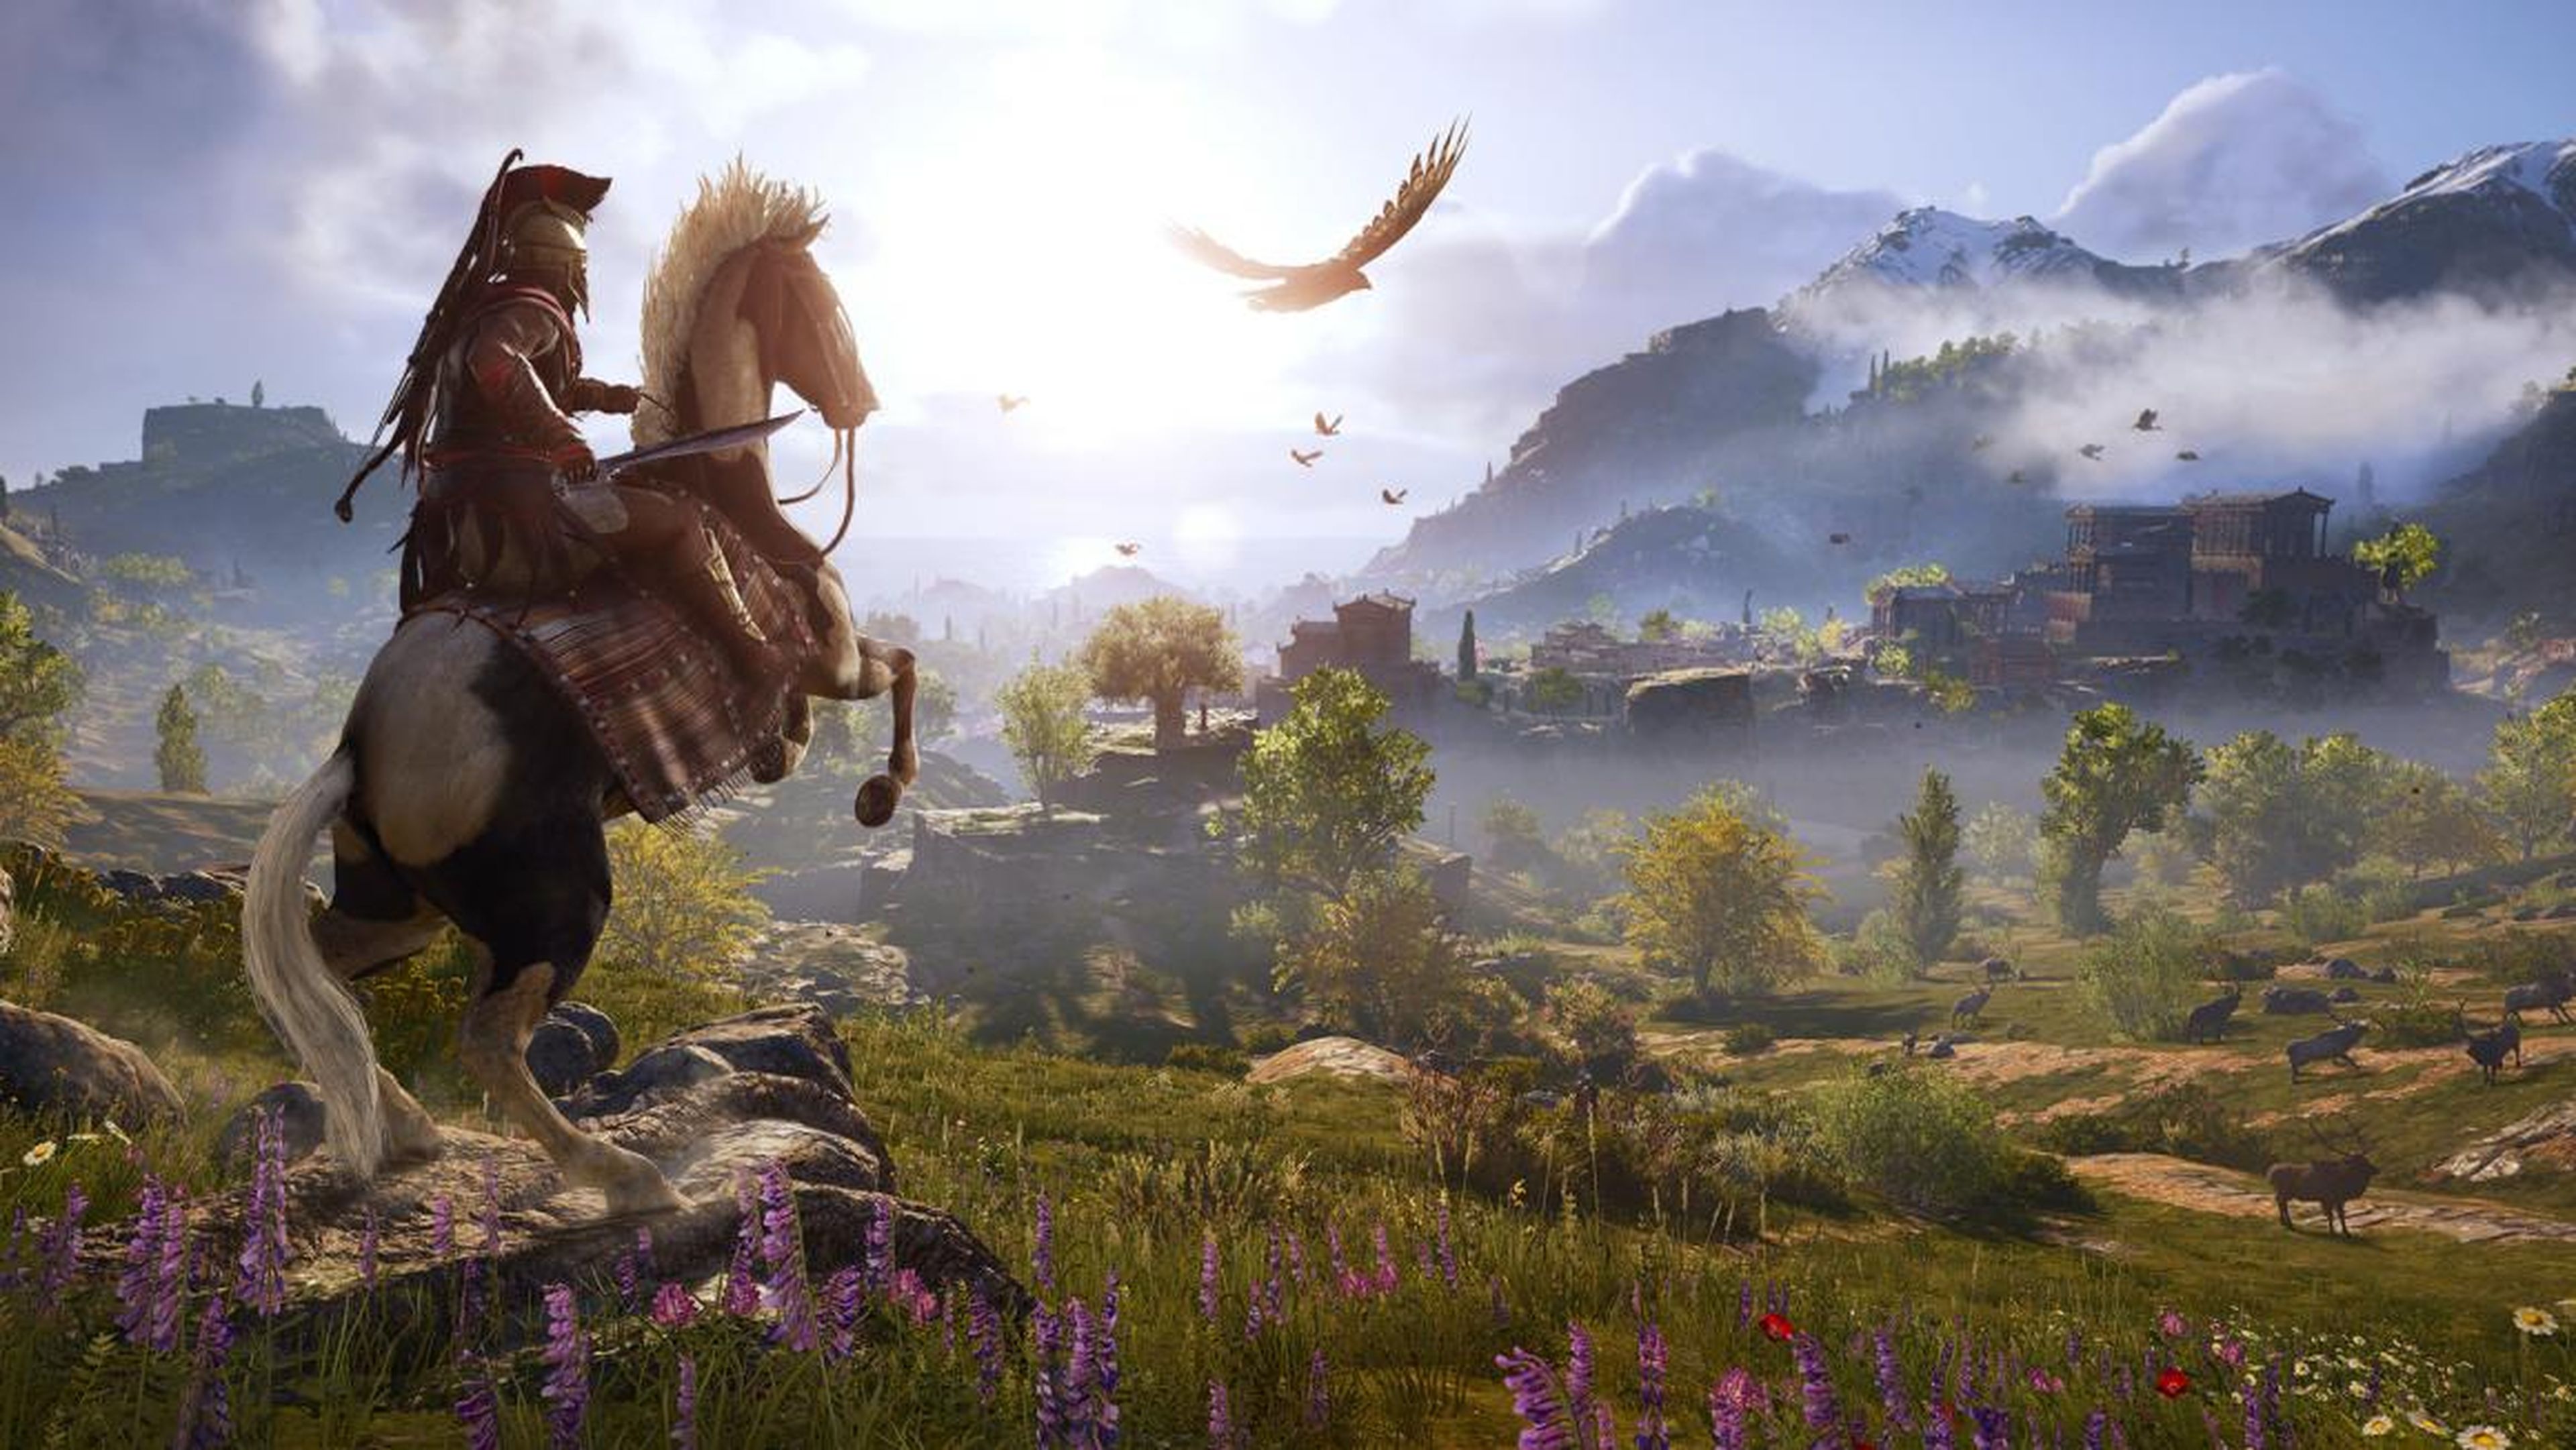 Using a brand new game like "Assassin's Creed: Odyssey" was the perfect test for ProjectStream.